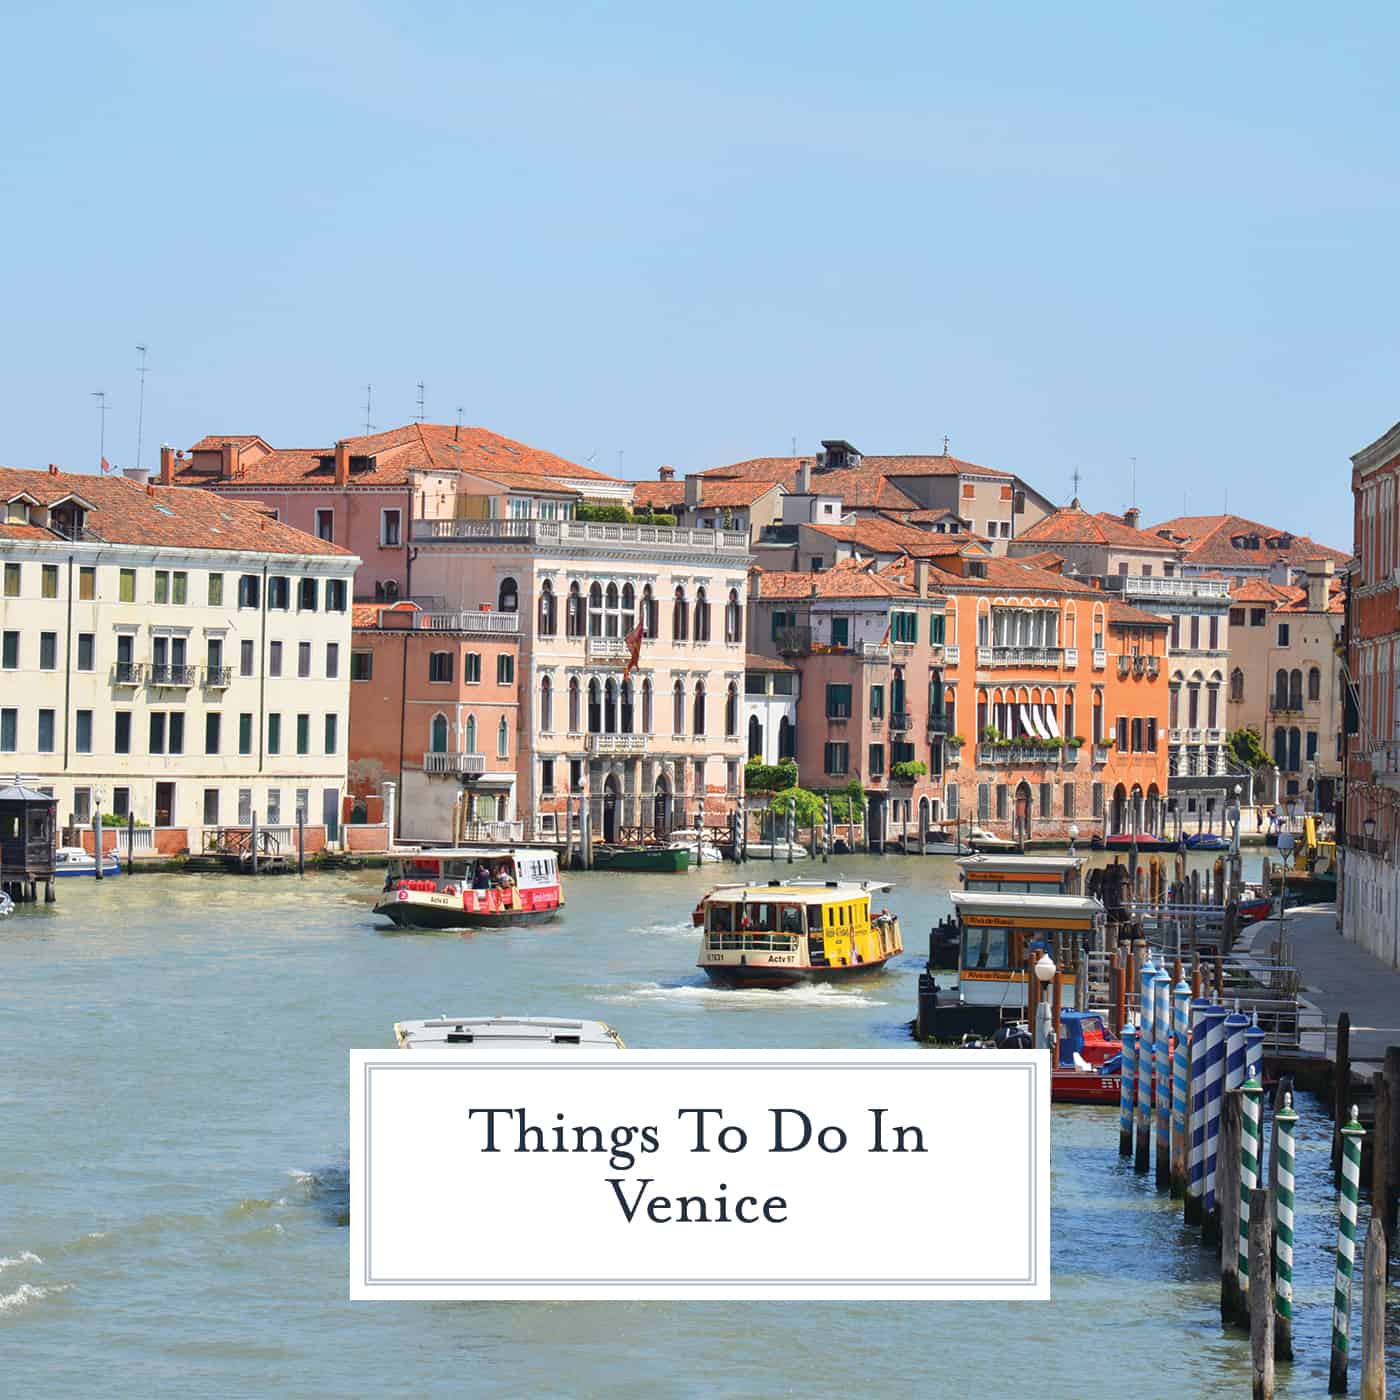 Venice, the city of canals, or the “floating city”, is made up of 117 small island connected by bridges and canals. There are countless things to do in Venice for a day trip or long weekend. #veniceitaly #italianvacation www.savoryexperiments.com